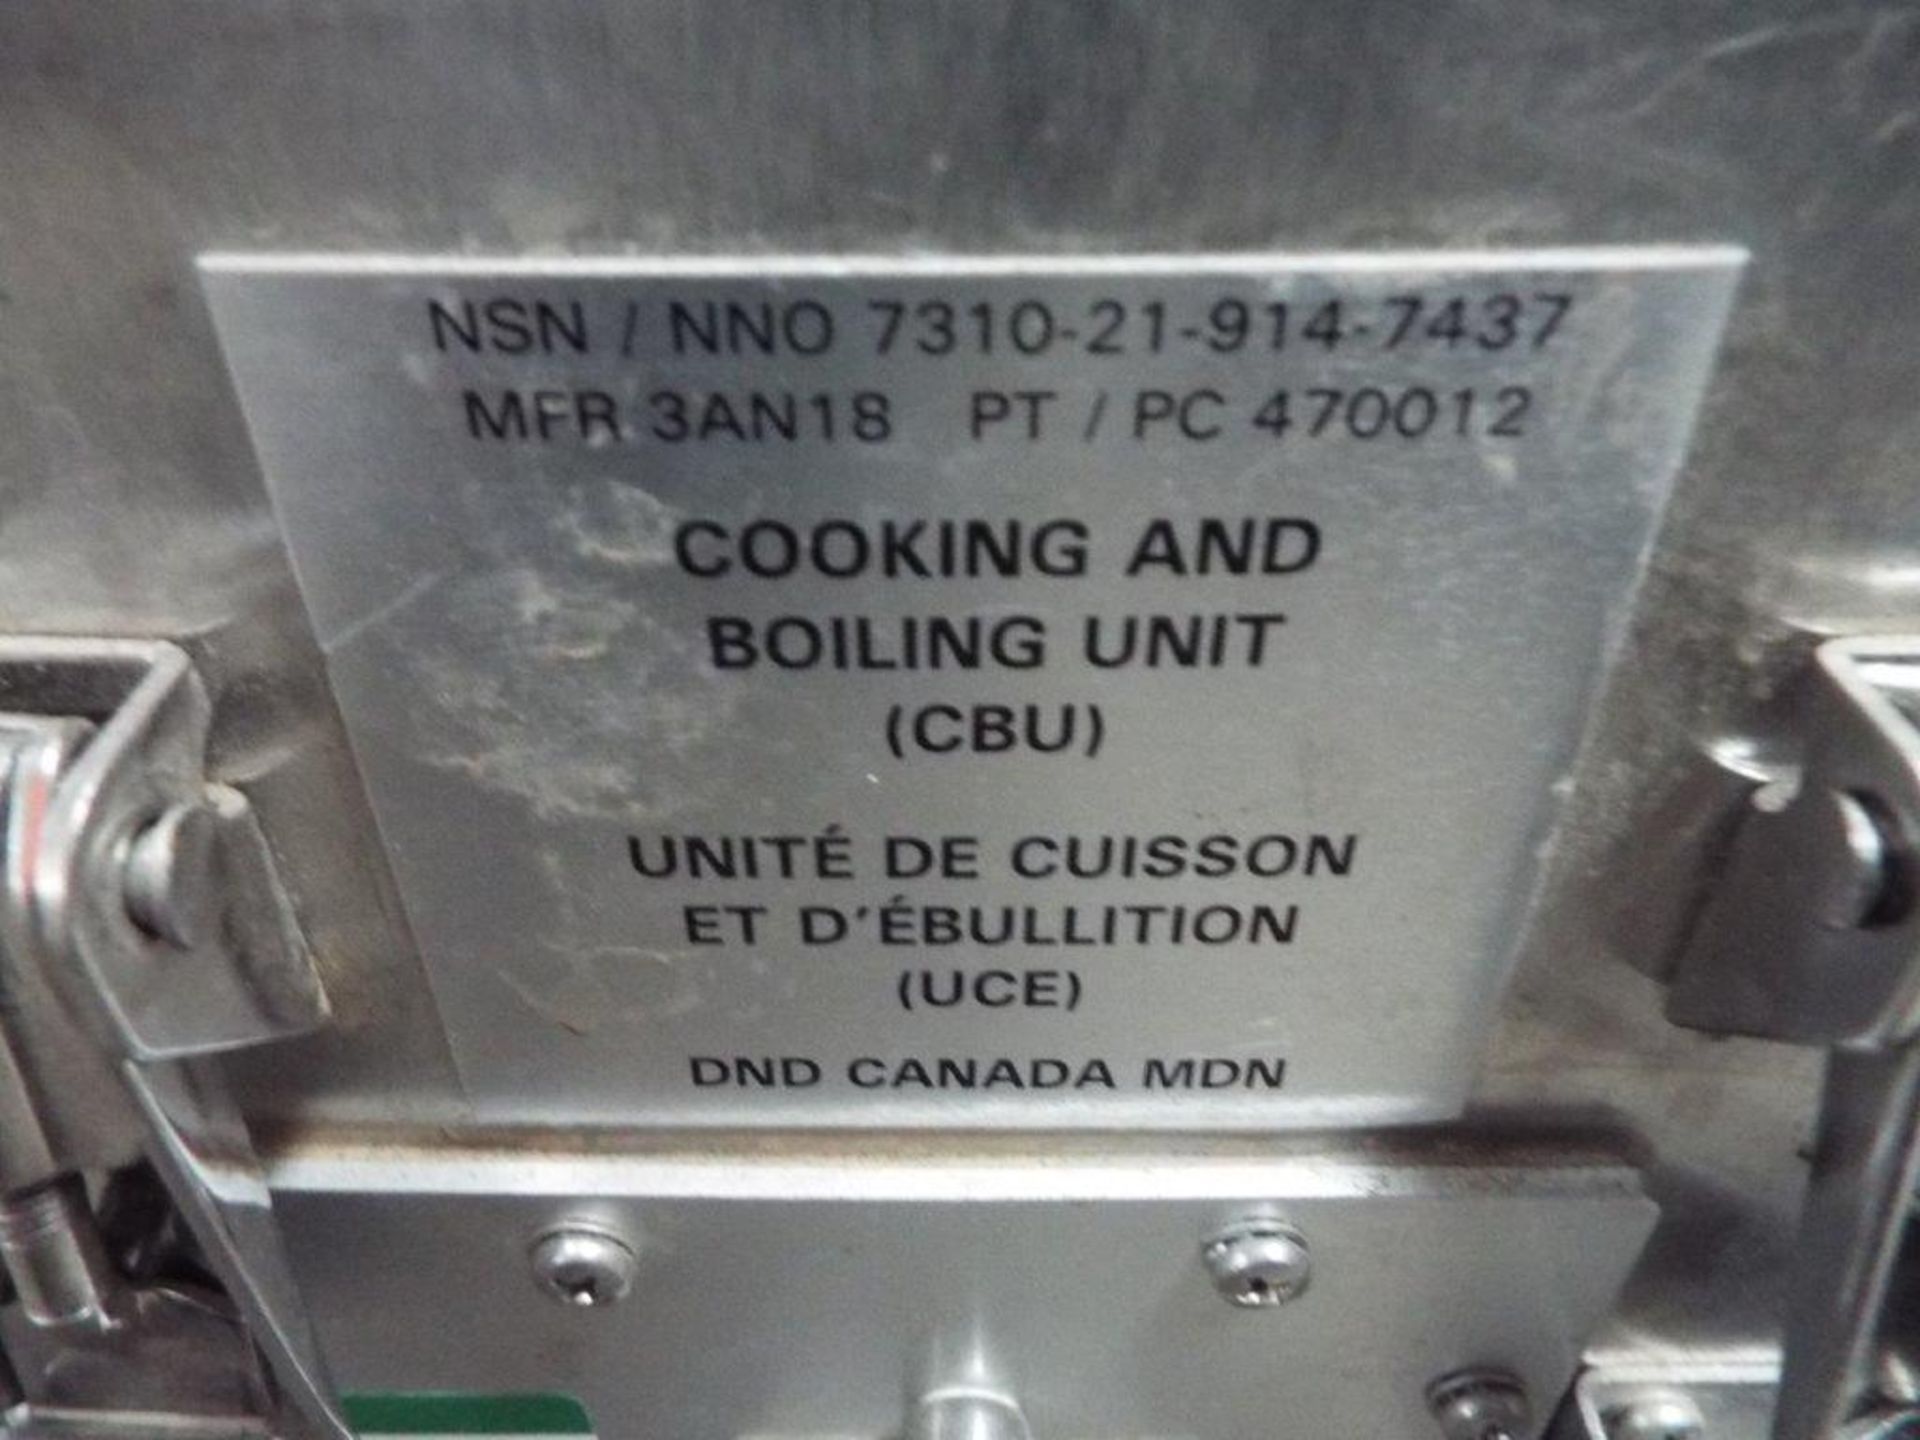 Isotherm 470012 Cooking and Boiling Unit - Image 7 of 9